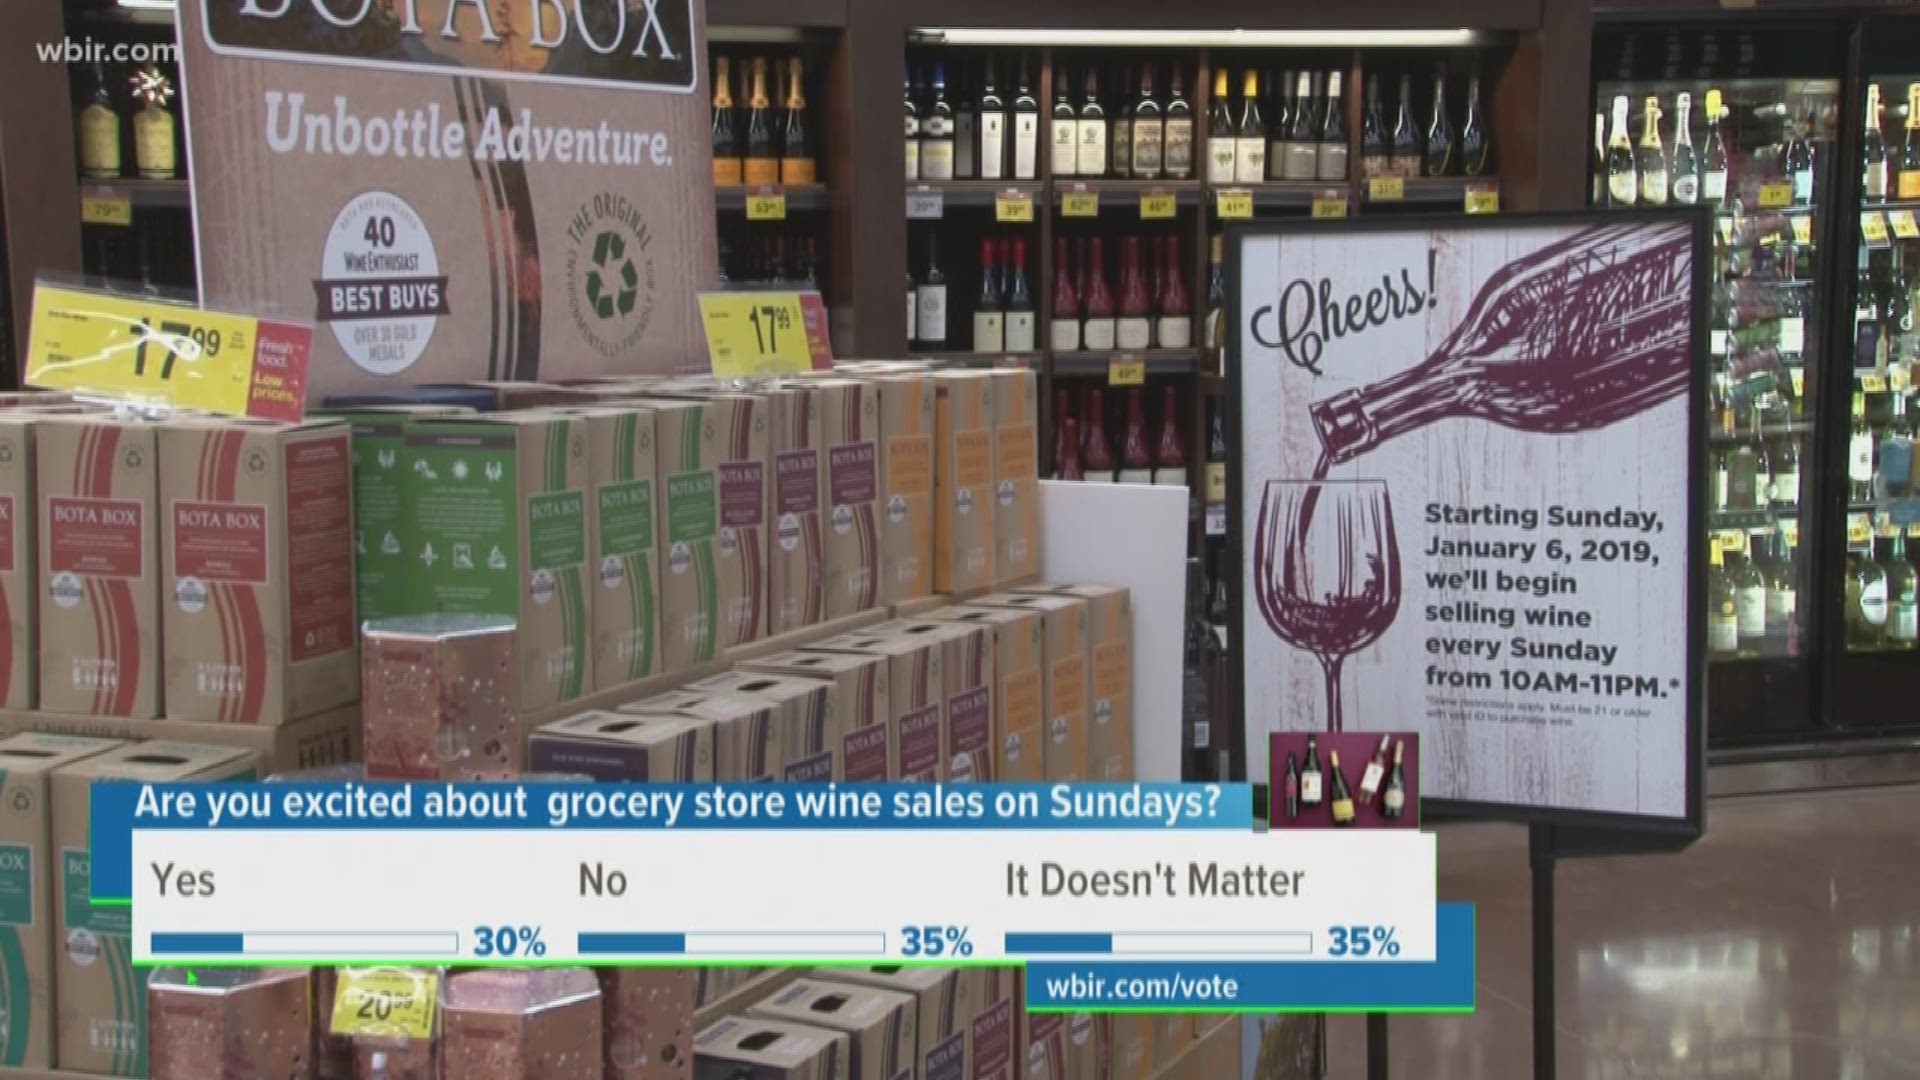 After months of waiting -- January 6 was the first day people across the state could buy wine in grocery stores on Sundays.